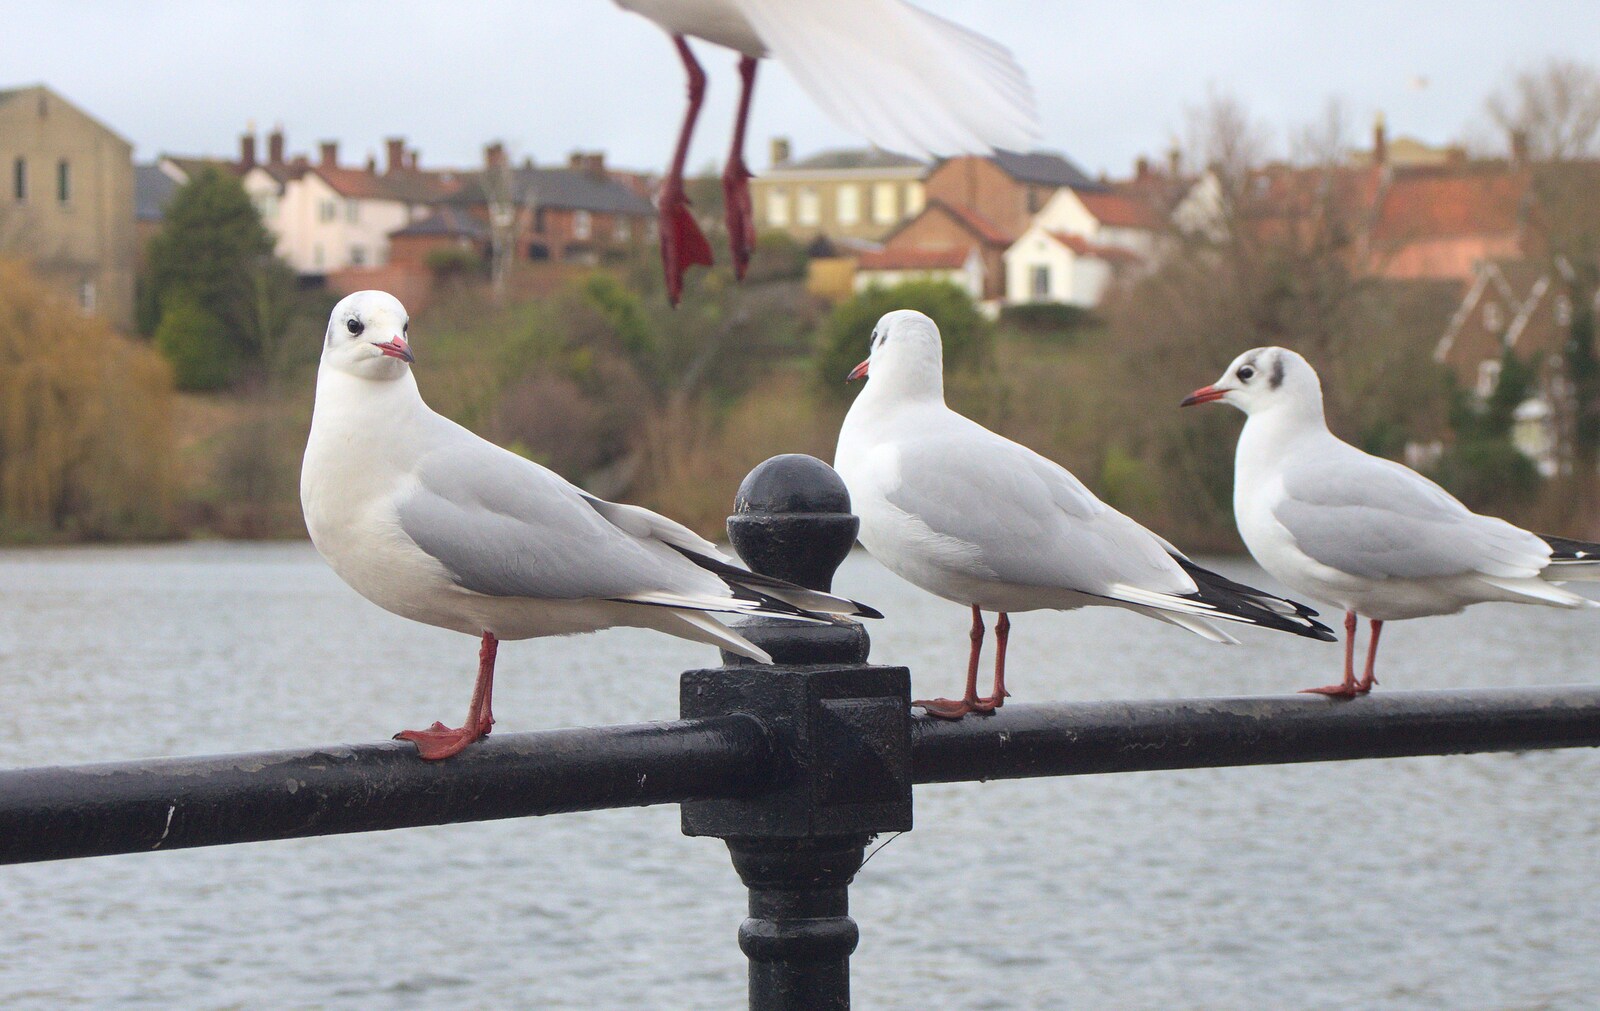 Gulls on the railings by the Mere from Pizza Express with Grandad, Bury St. Edmunds, Suffolk - 29th December 2011